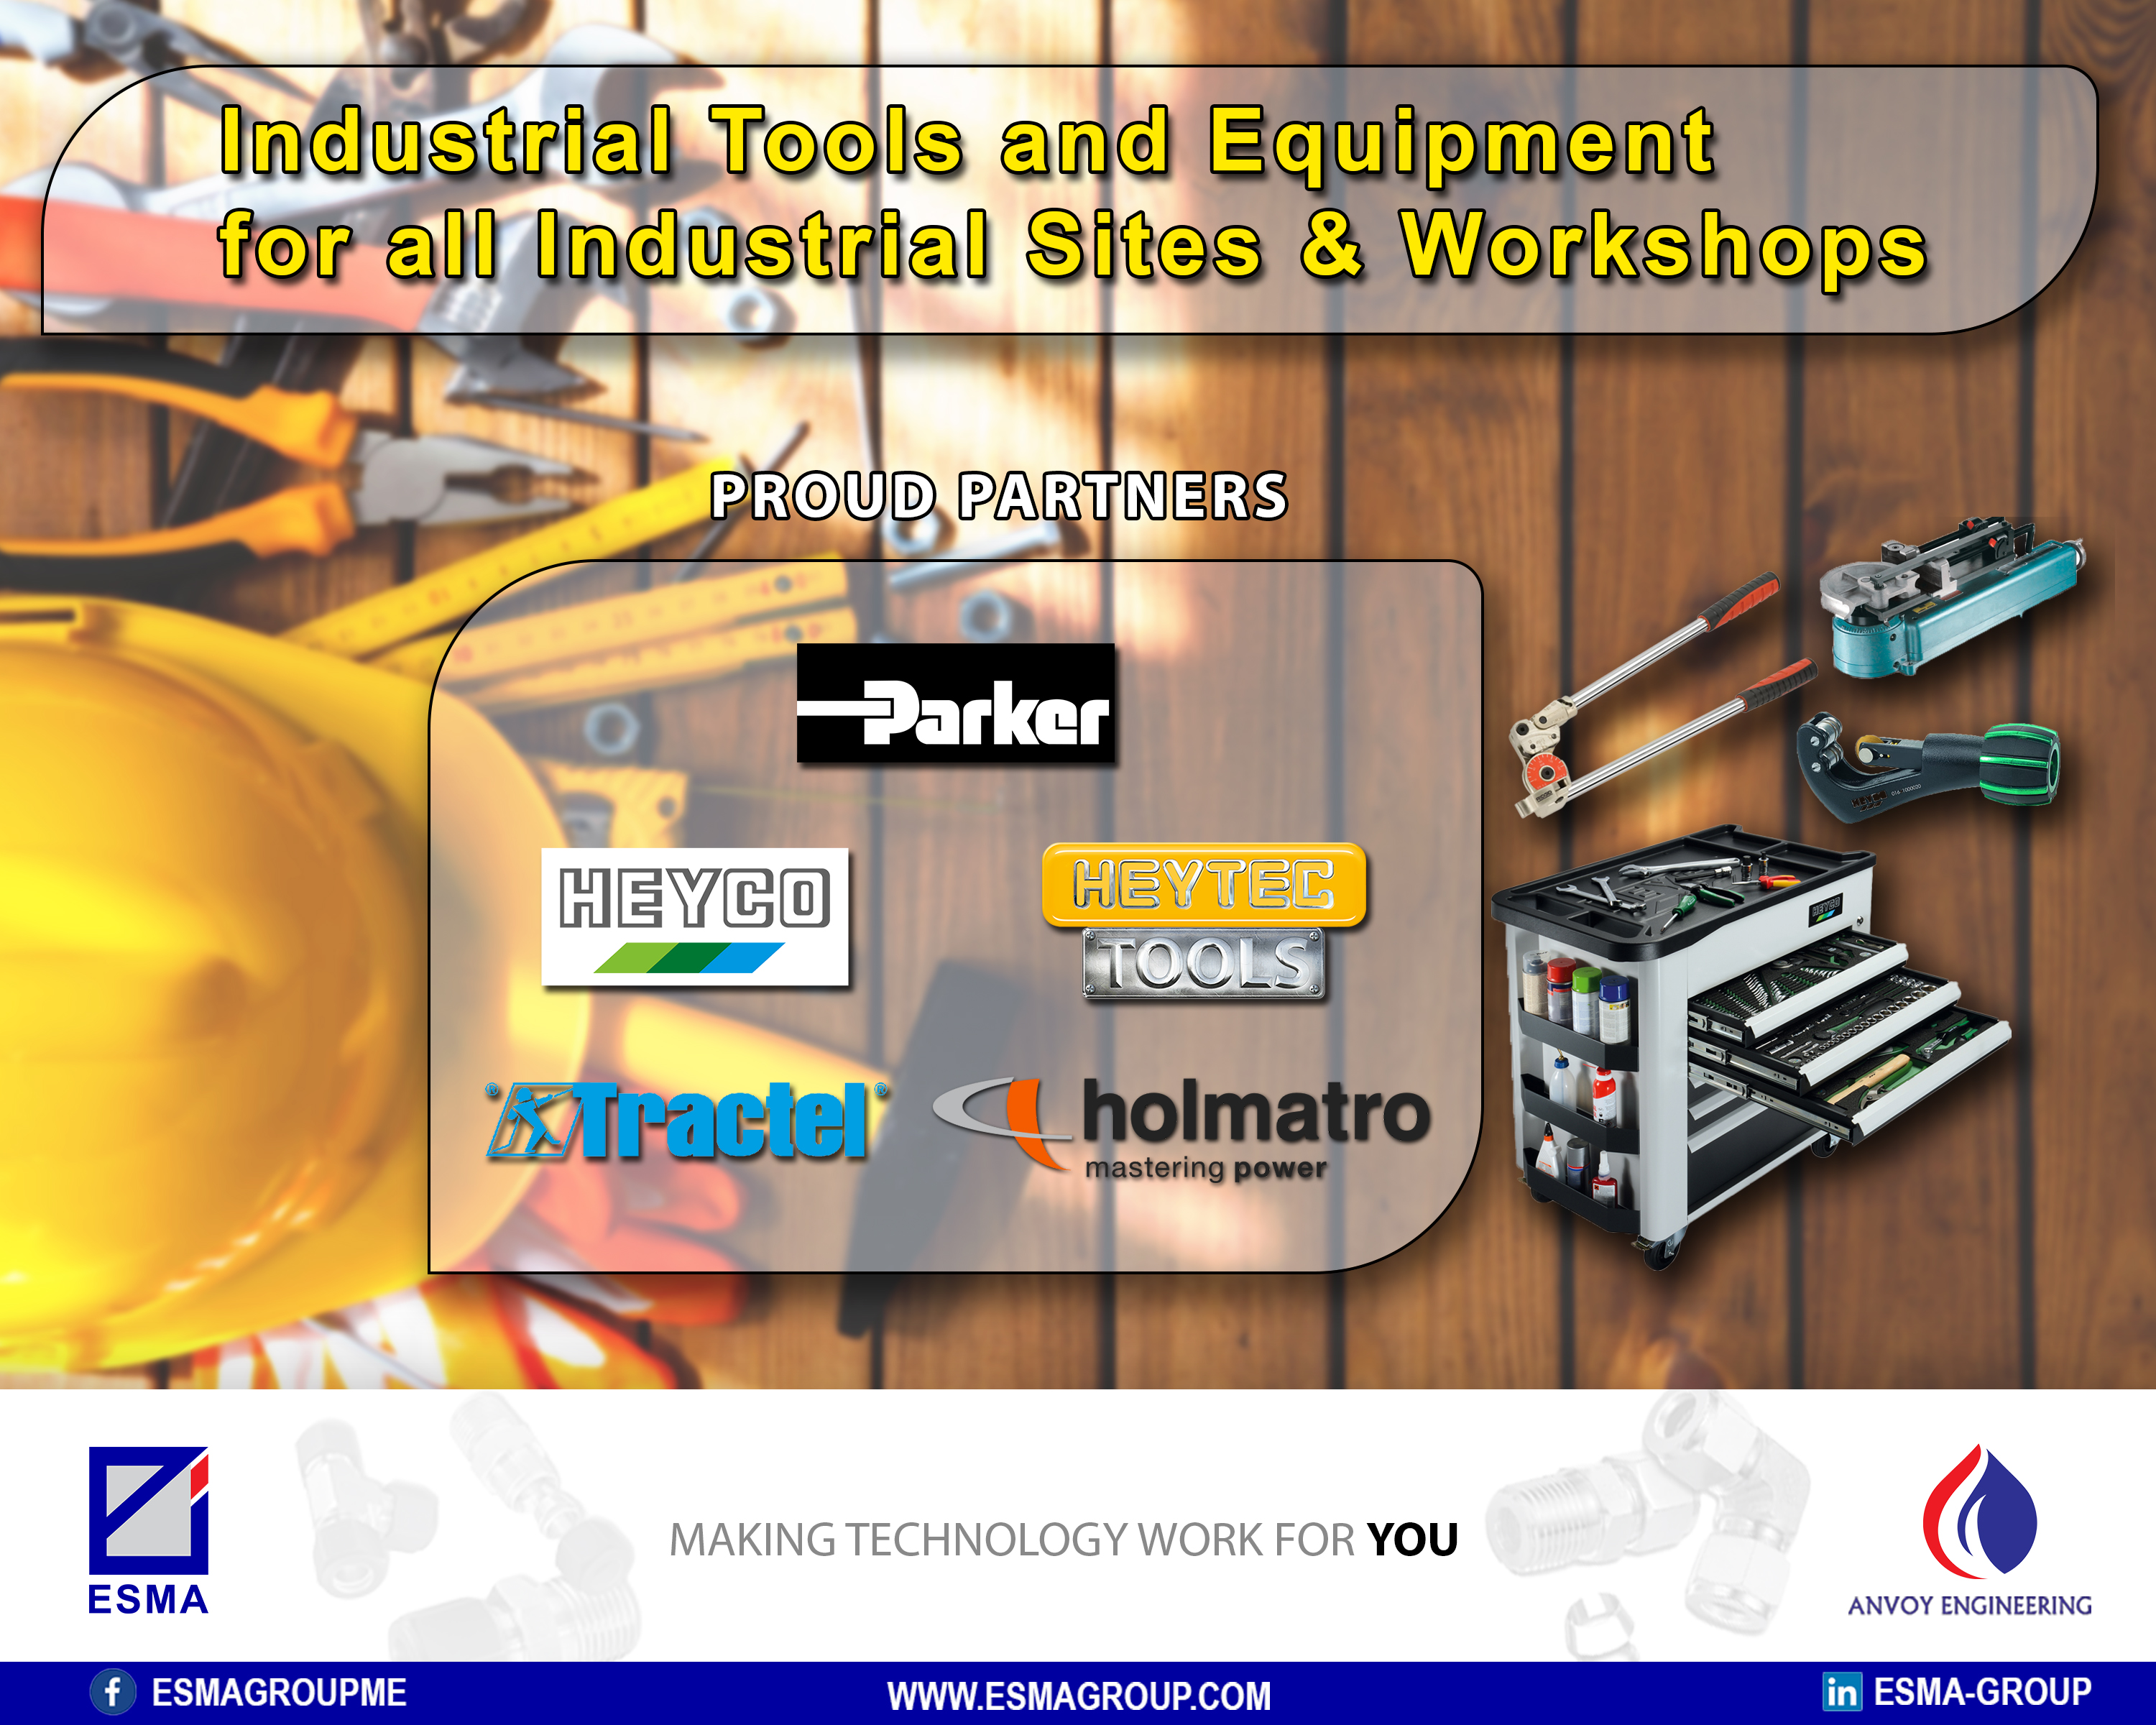 Industrial Tools and Equipment for all Industrial Sites & Workshops.